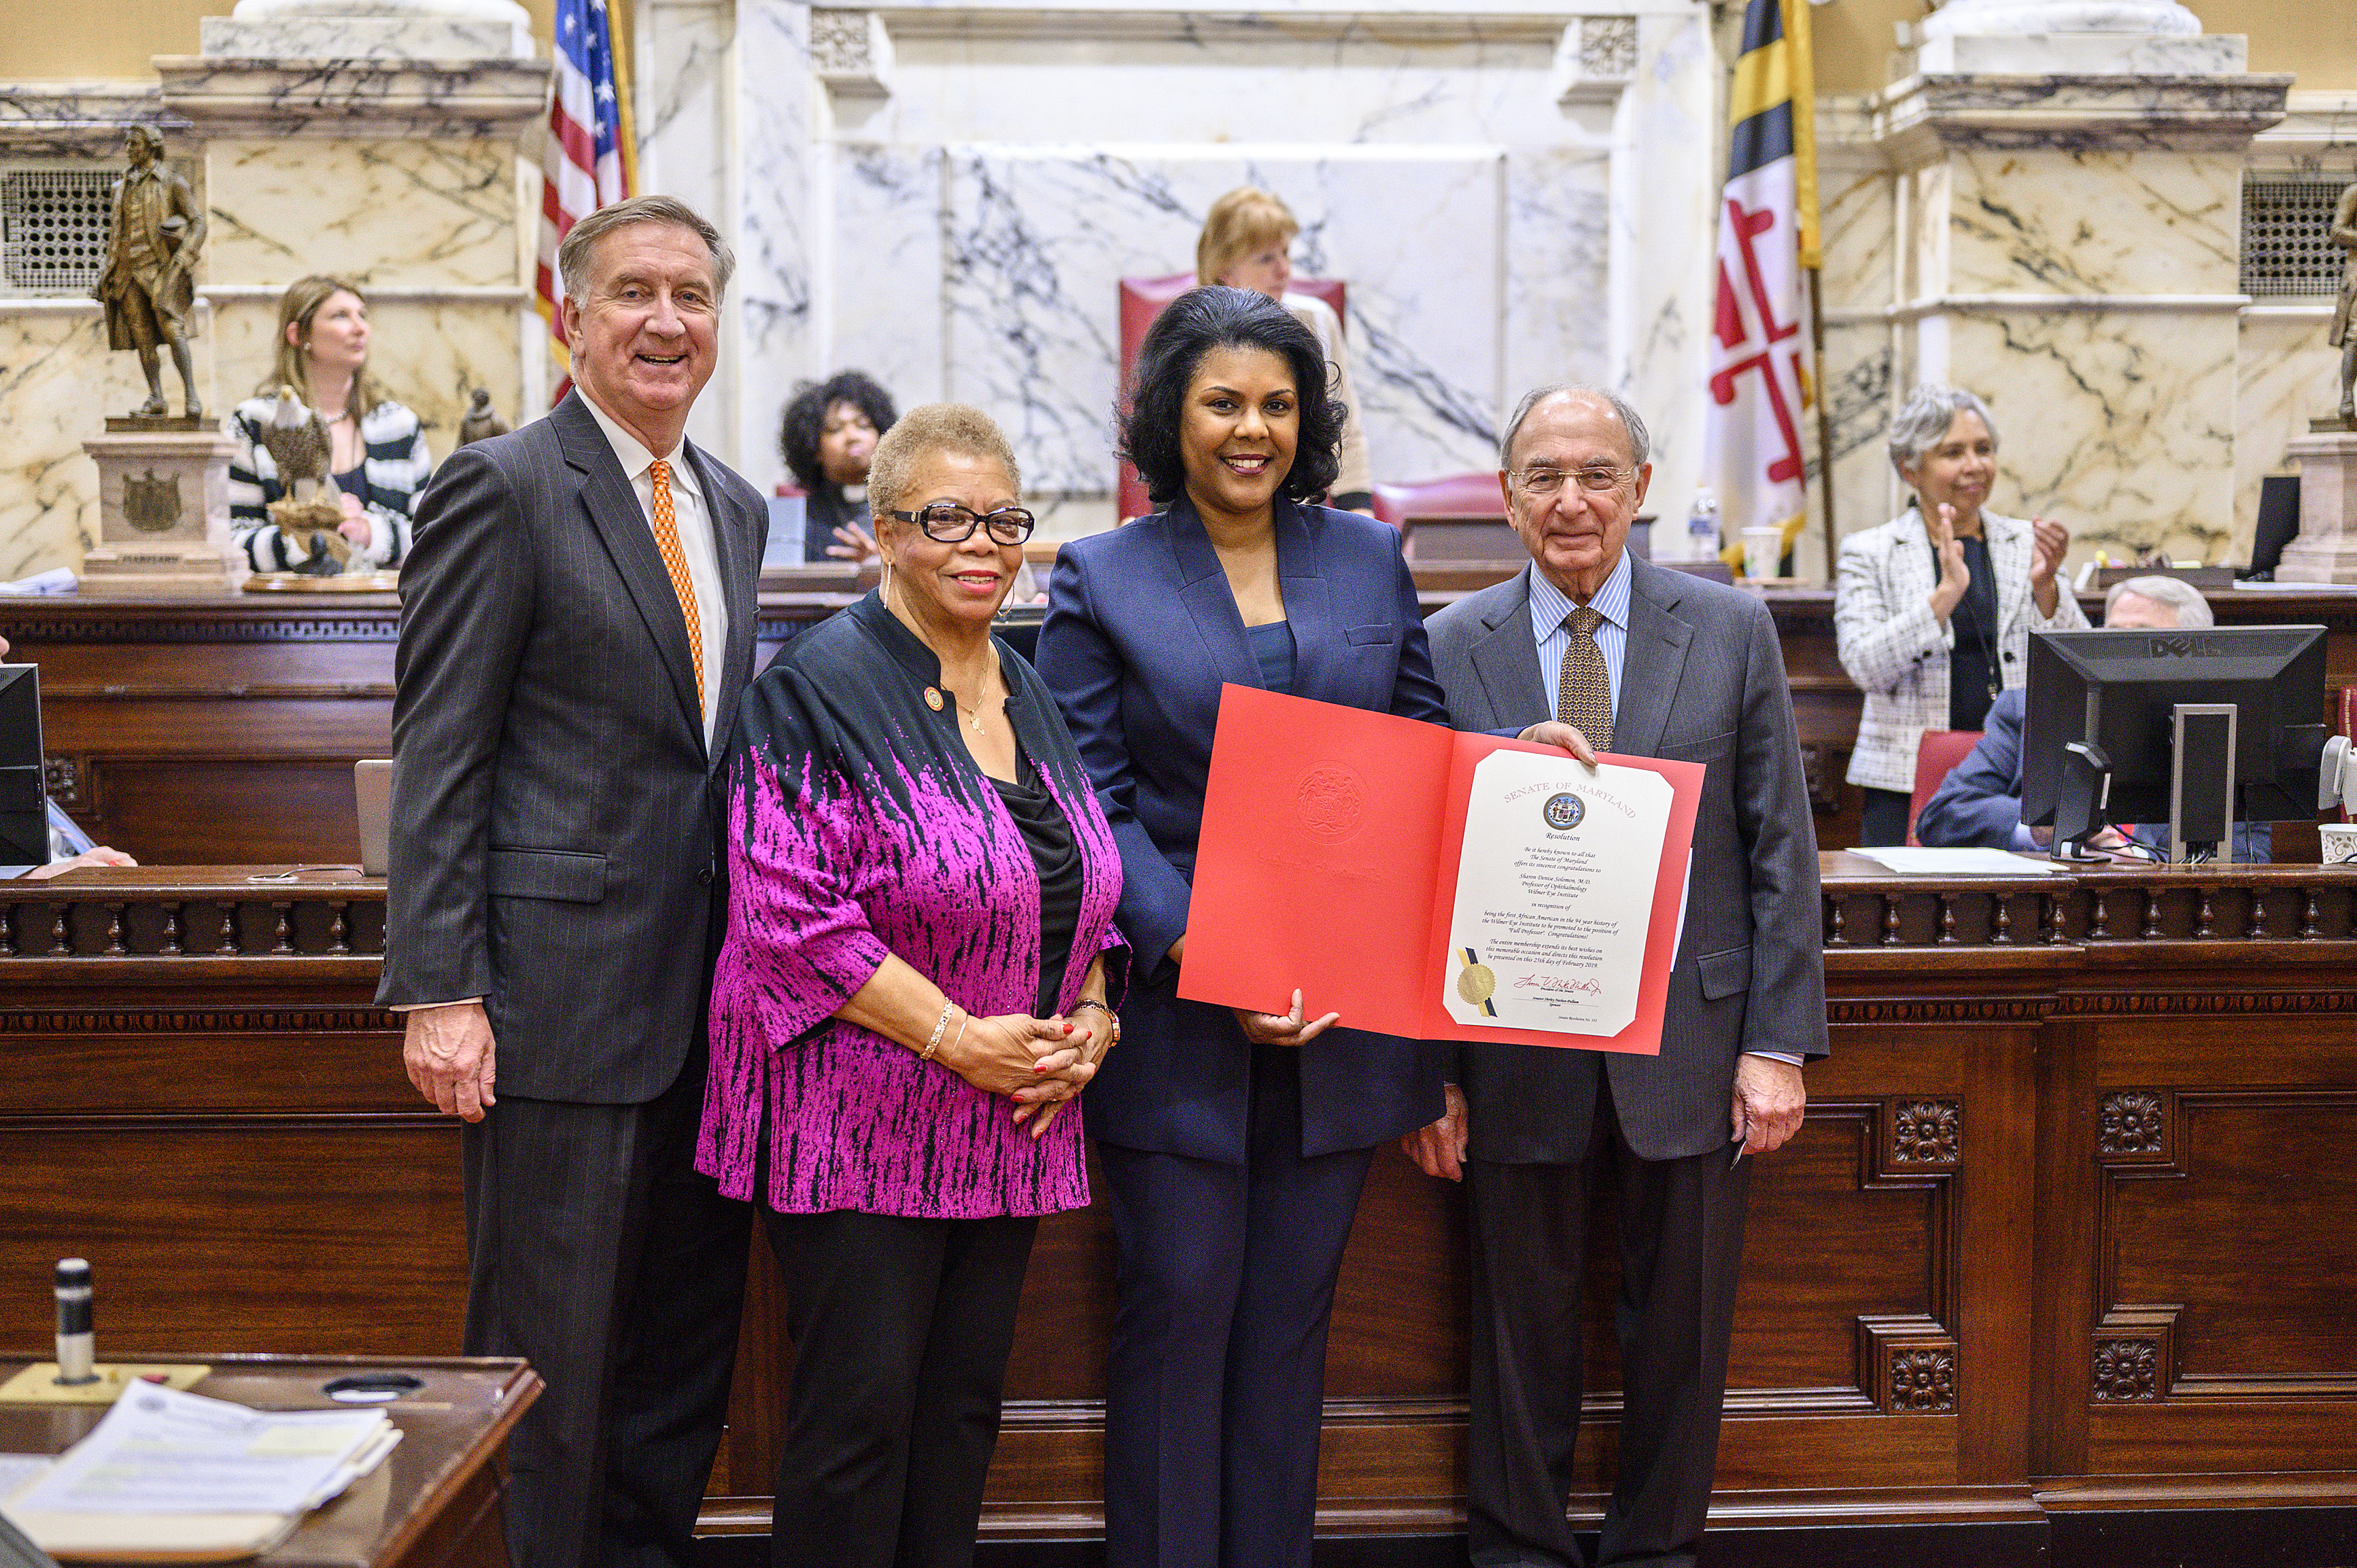 Sharon Solomon honored at the Maryland Statehouse in Annapolis